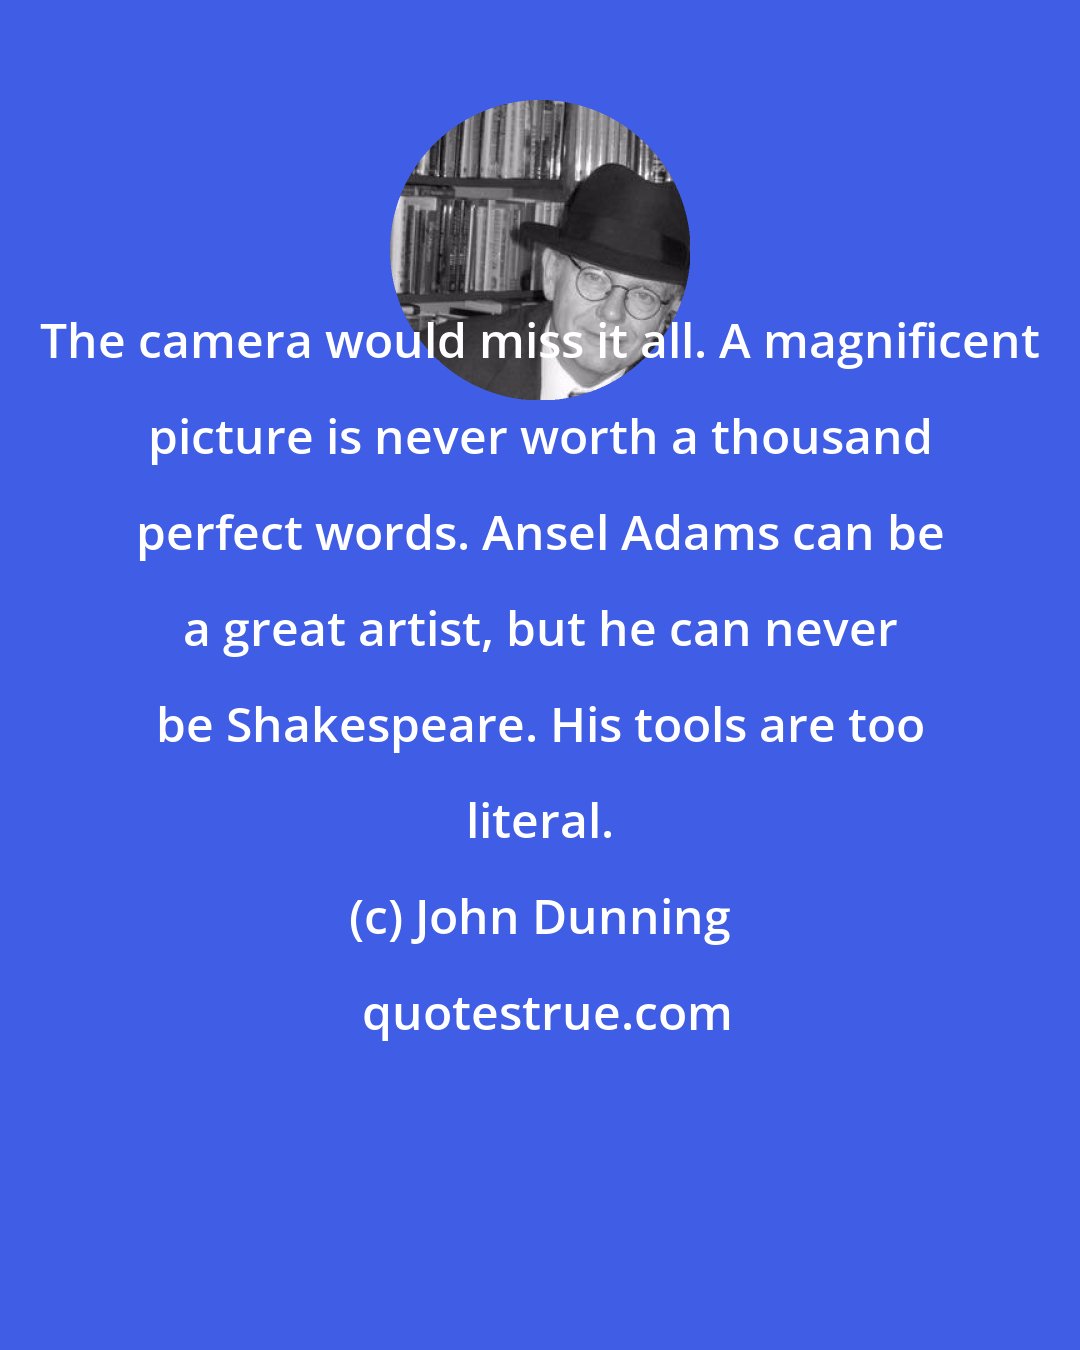 John Dunning: The camera would miss it all. A magnificent picture is never worth a thousand perfect words. Ansel Adams can be a great artist, but he can never be Shakespeare. His tools are too literal.